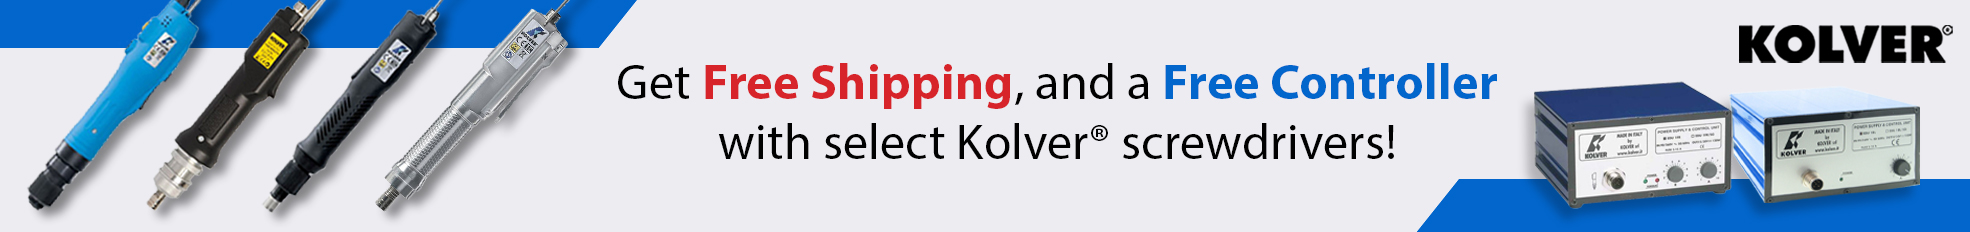 Get Free Shipping, and a Free Controller with select Kolver screwdrivers!